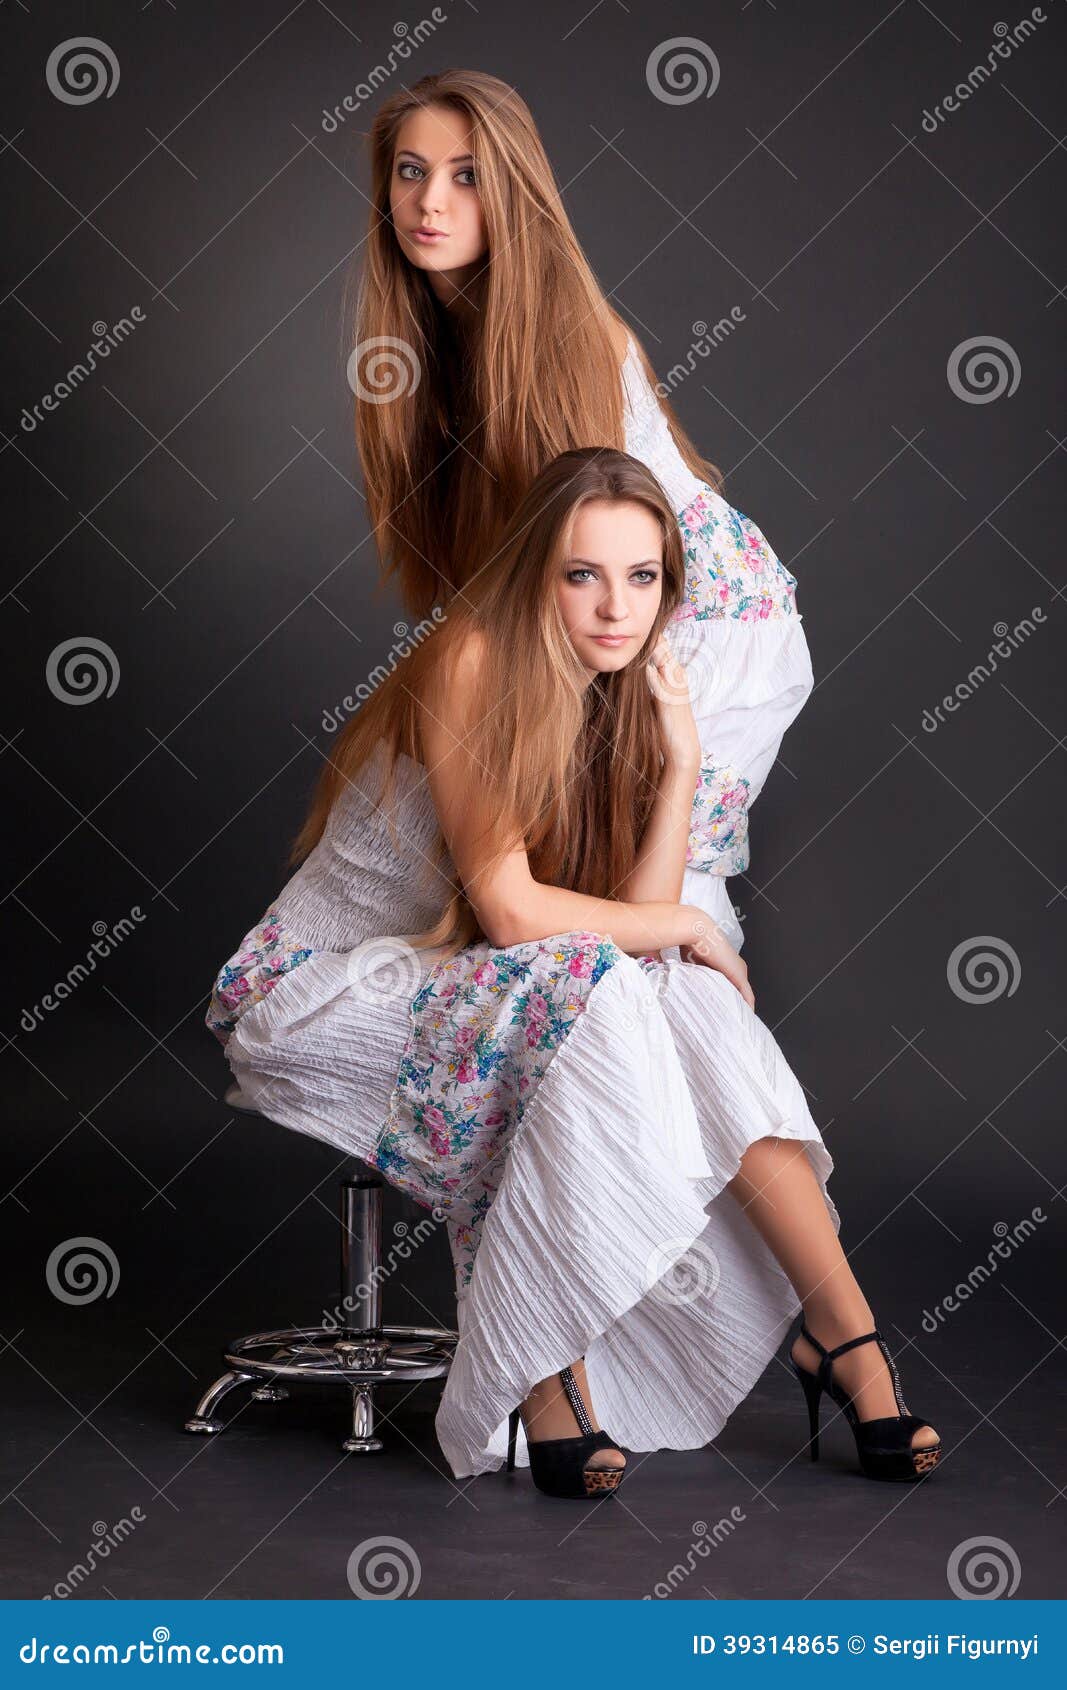 Two Girls Twins, Isolated on the Black Background Stock Image - Image ...